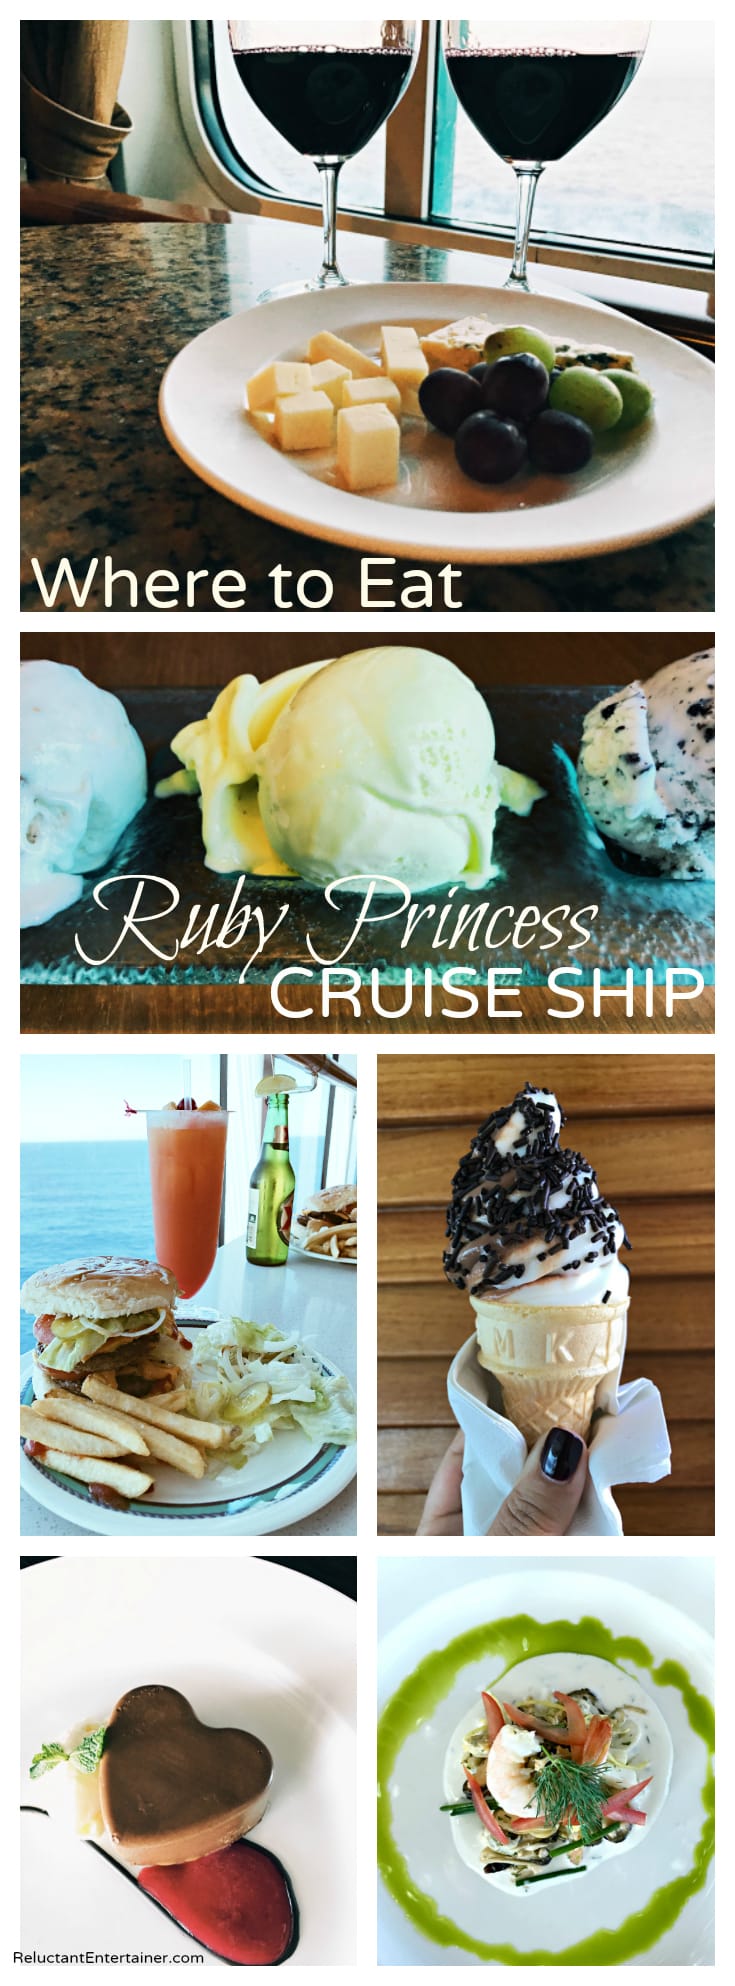 Where to Eat on a Ruby Princess Cruise Ship